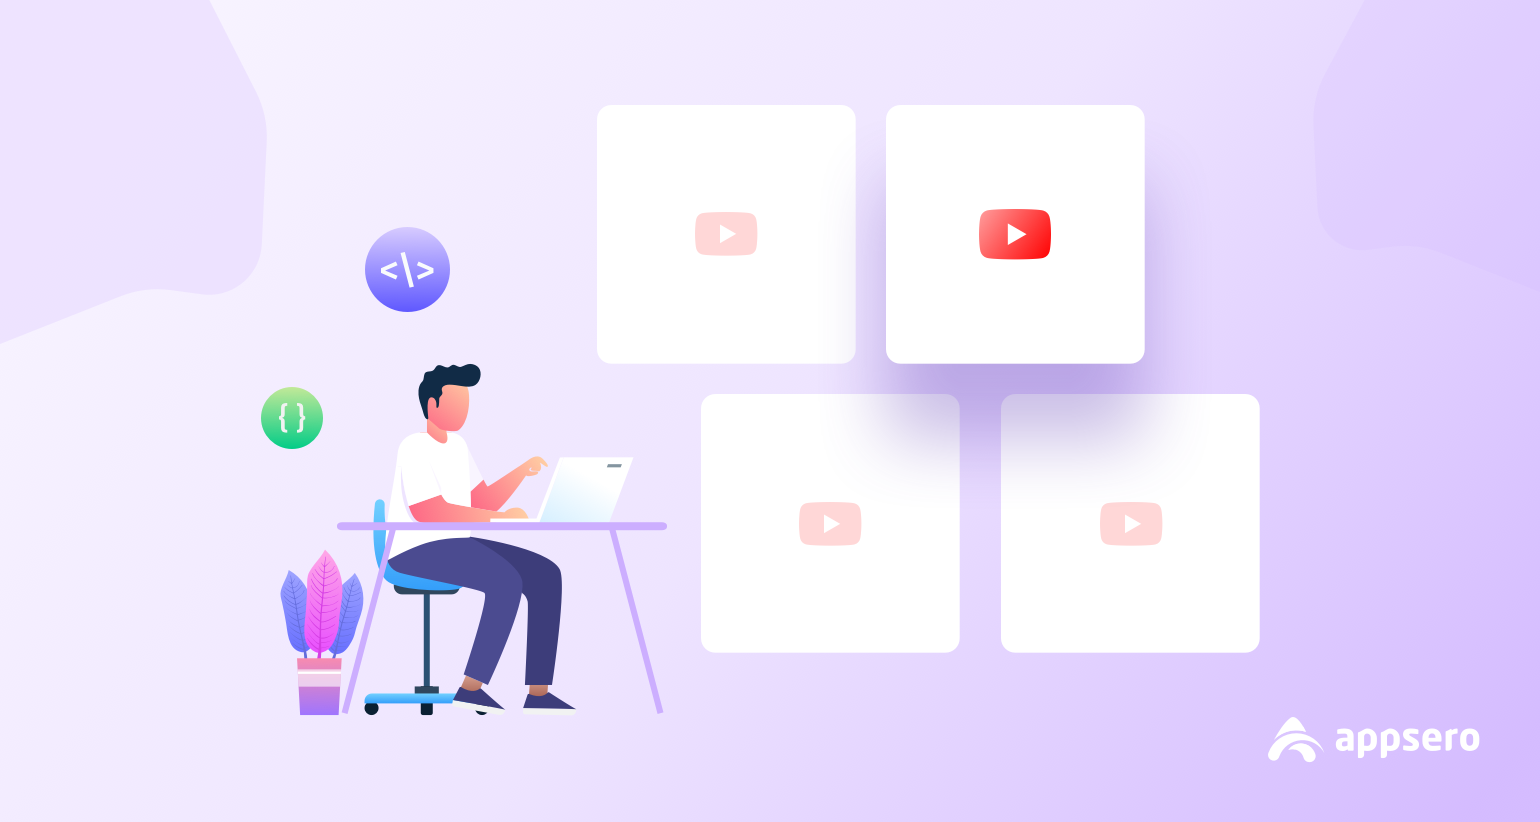 Top 10 WordPress Based YouTube Channels for Developers to Follow